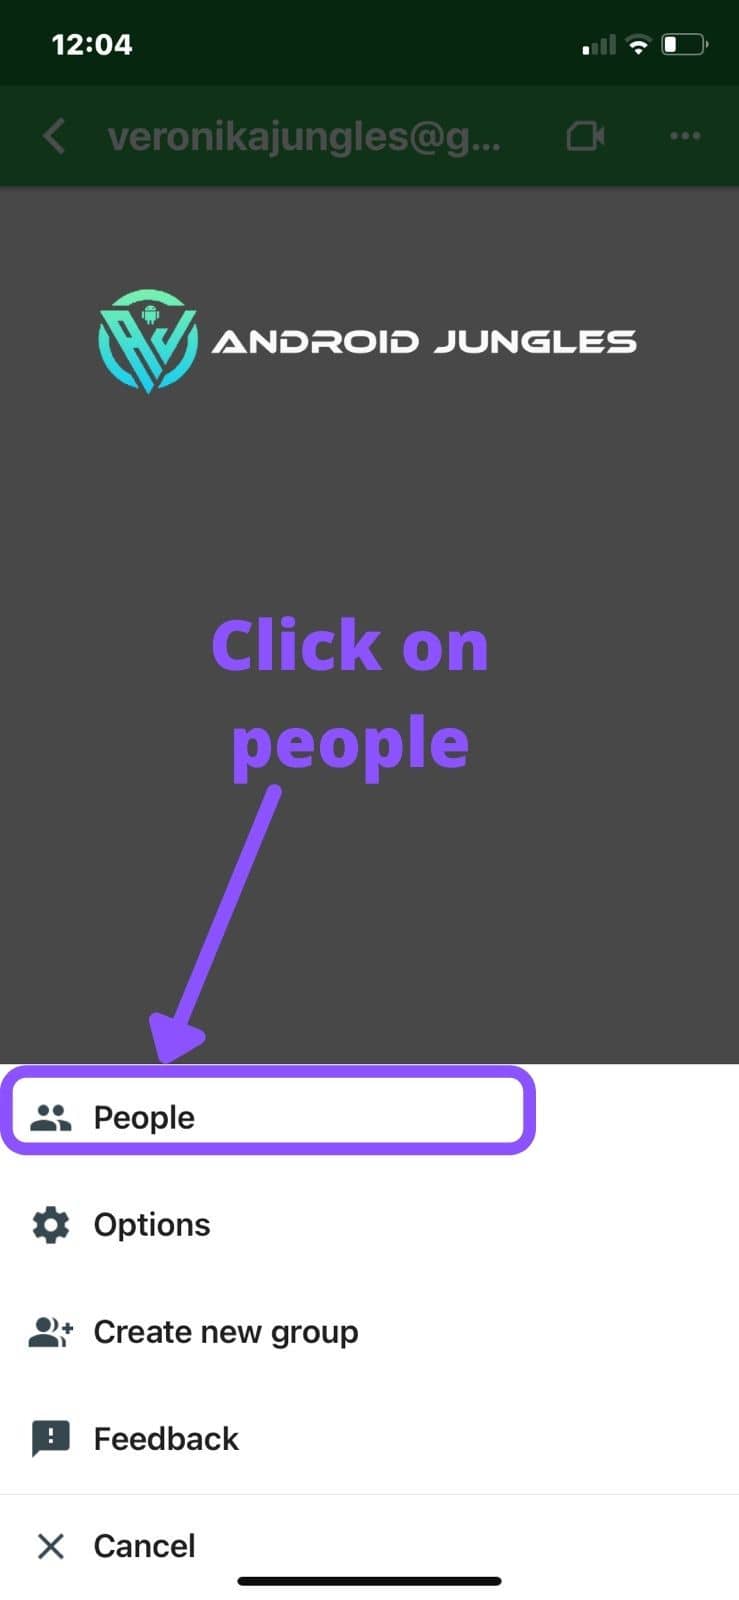 Click on people